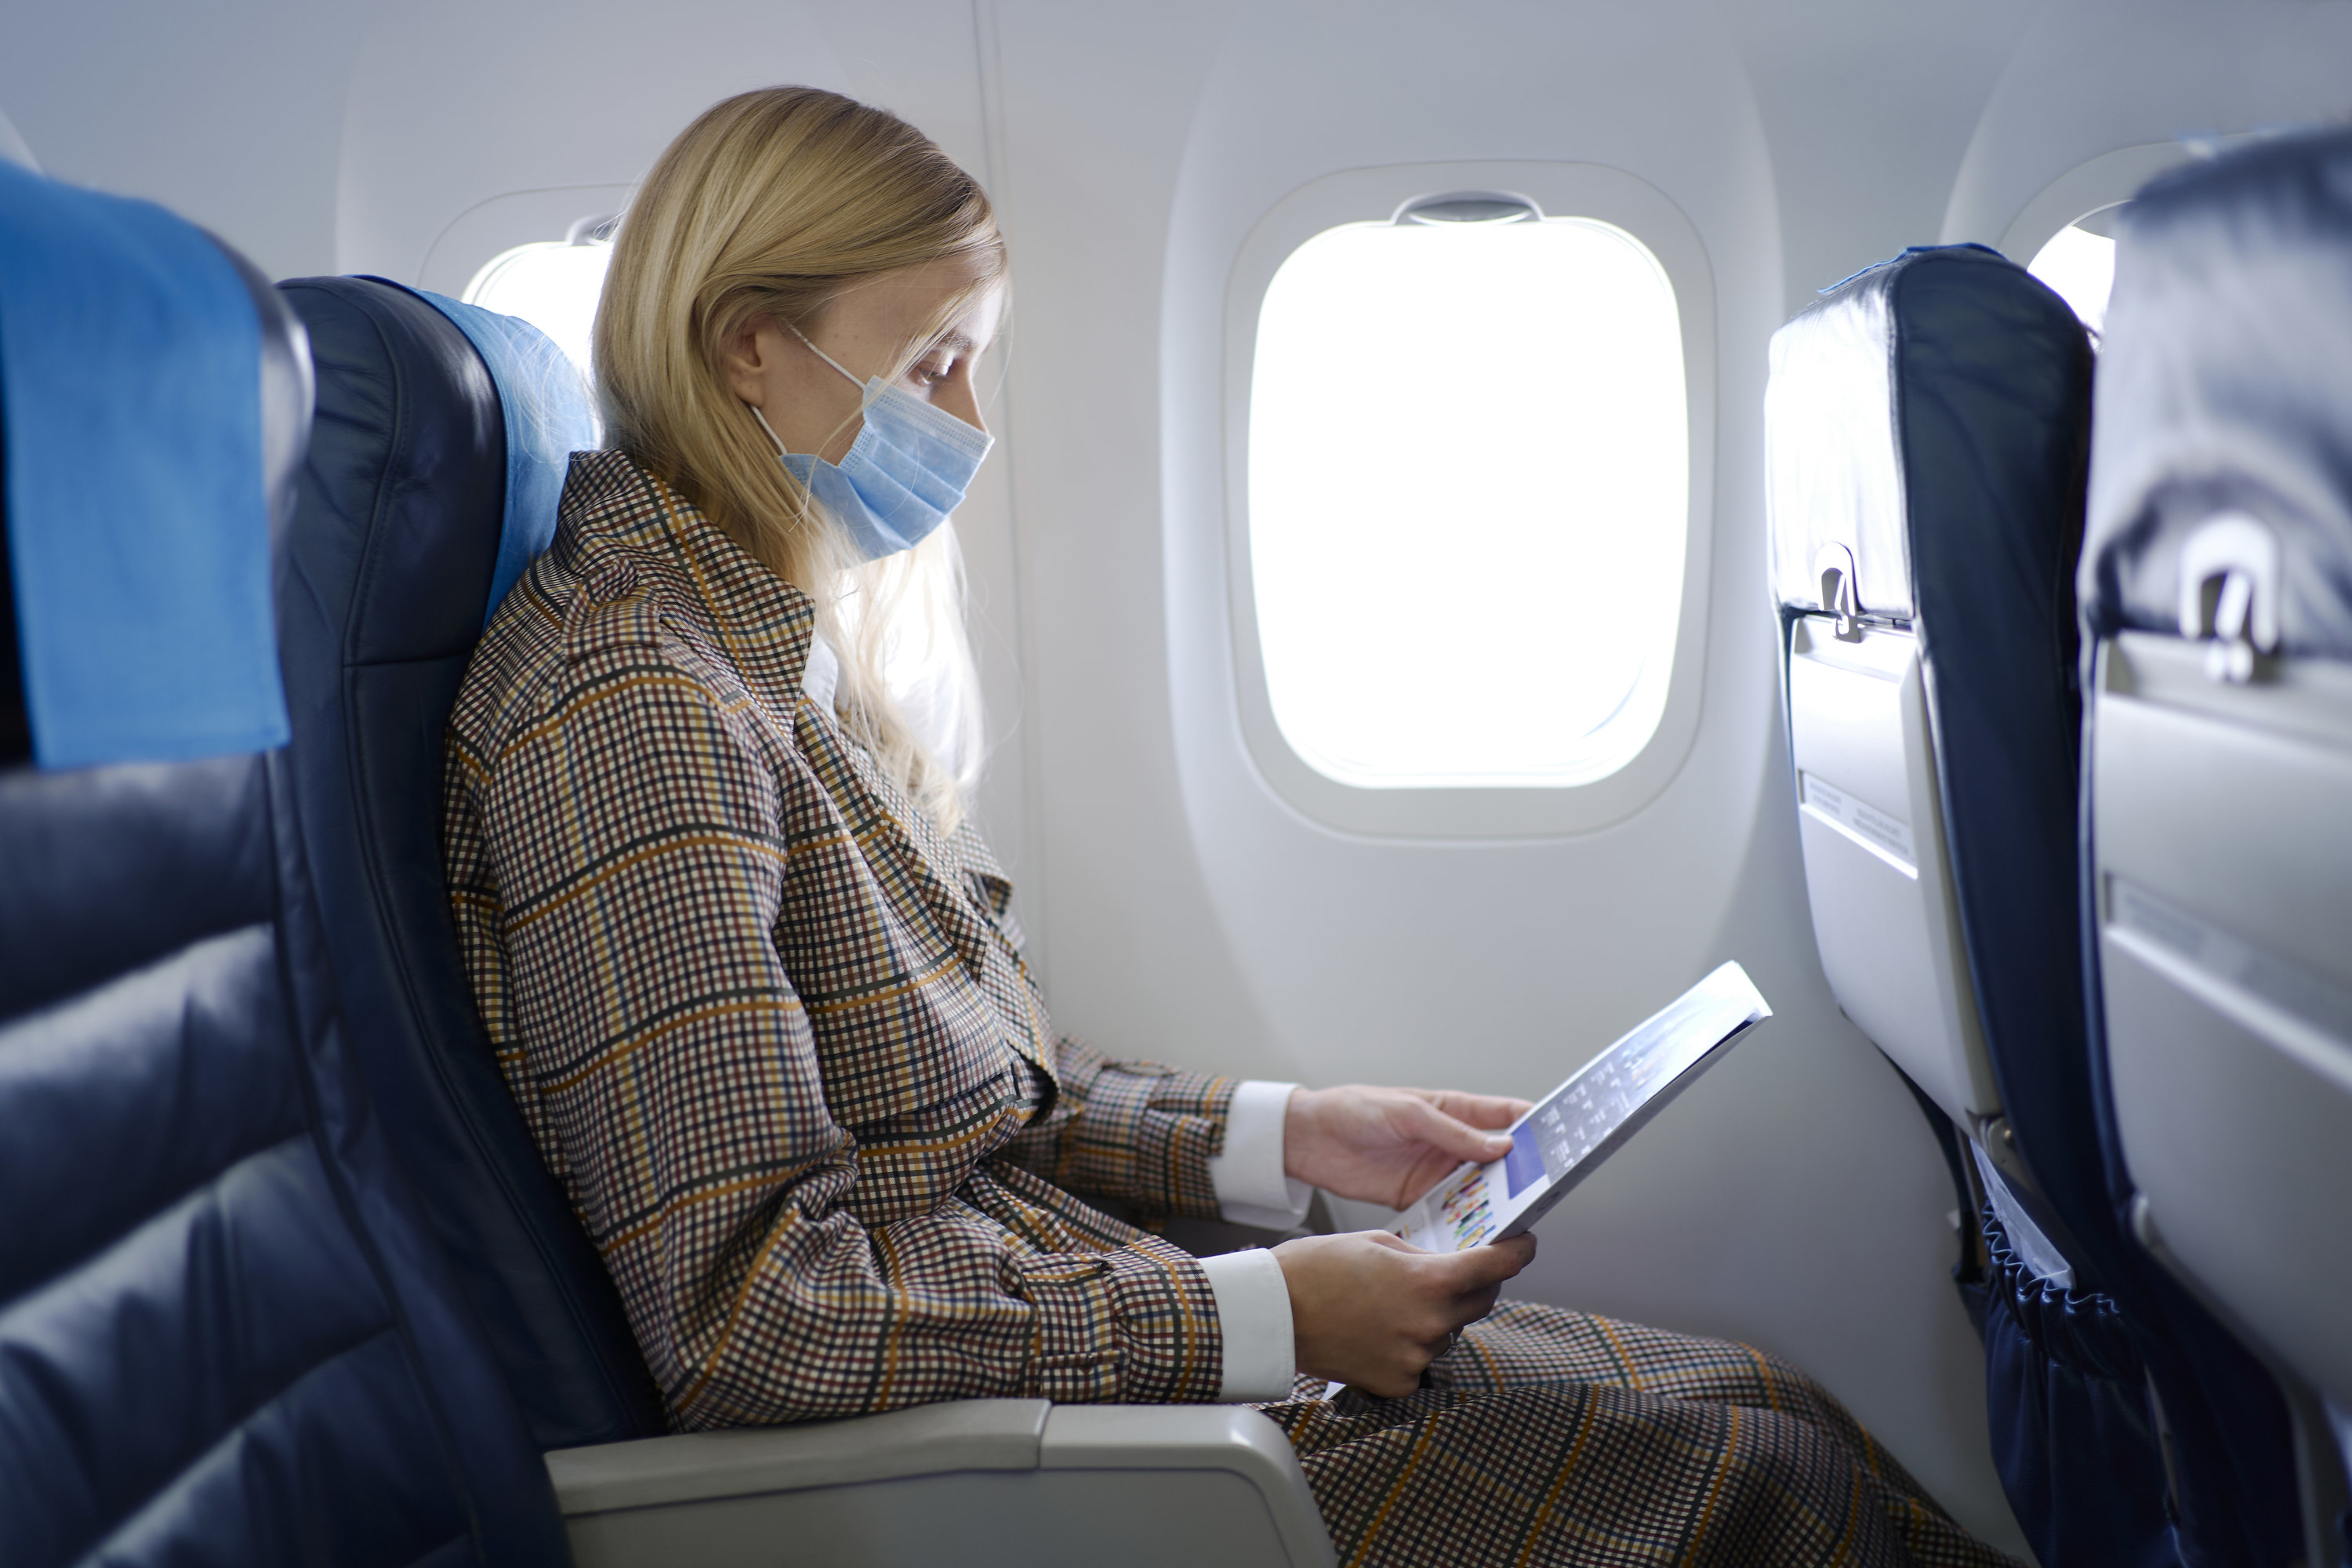 A stock image of a woman sitting in a plane seat by the window